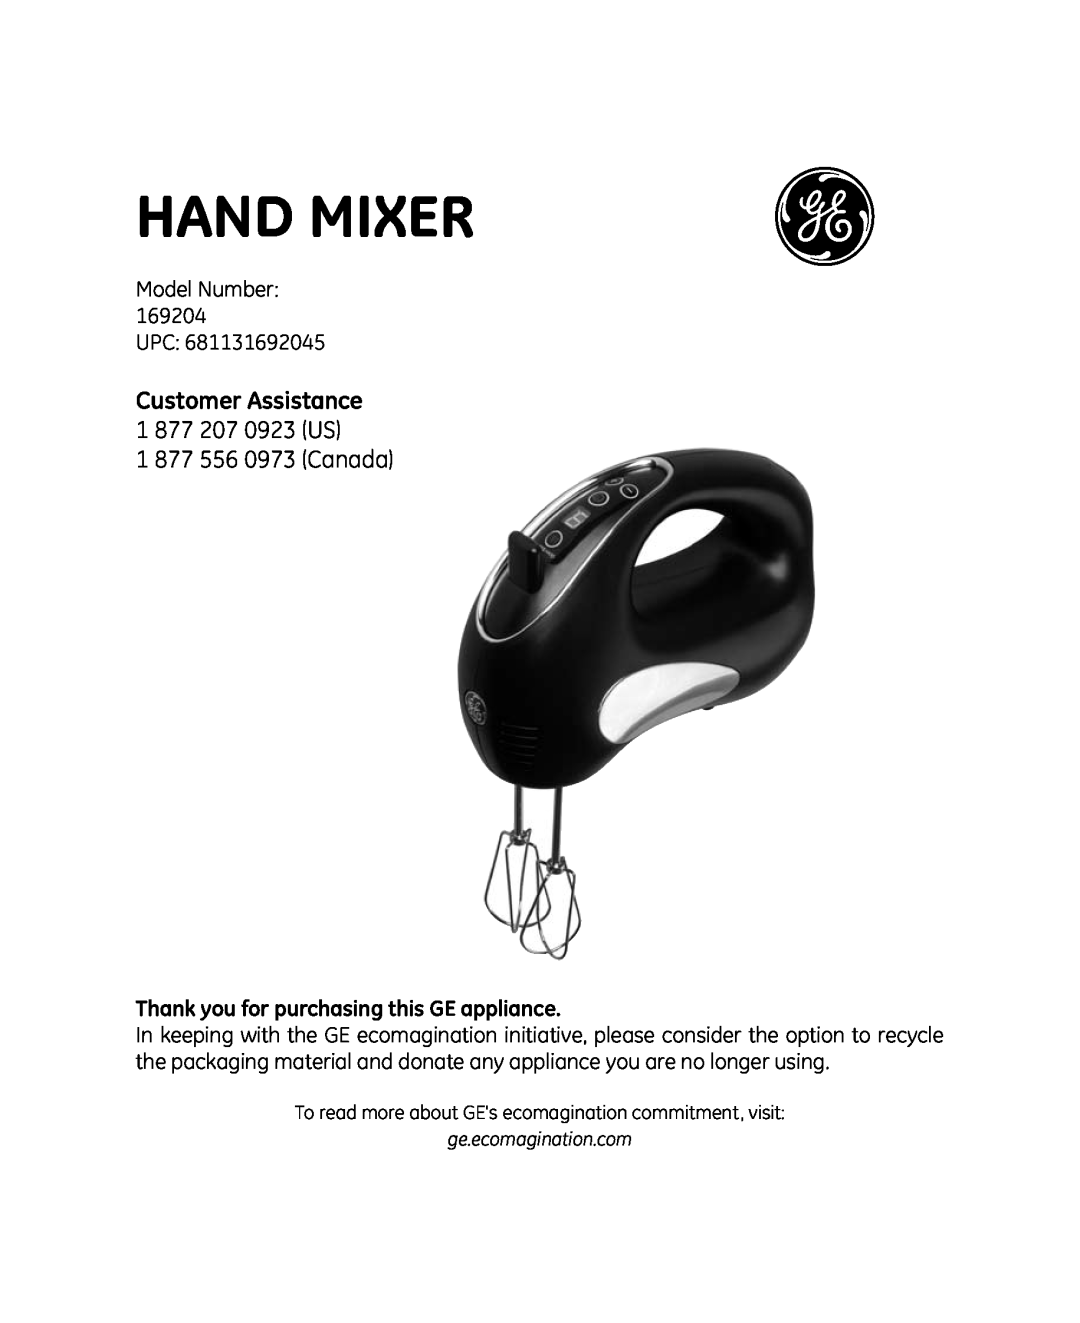 GE 681131692045 manual Customer Assistance 1 877 207 0923 US, Thank you for purchasing this GE appliance, Hand Mixer 